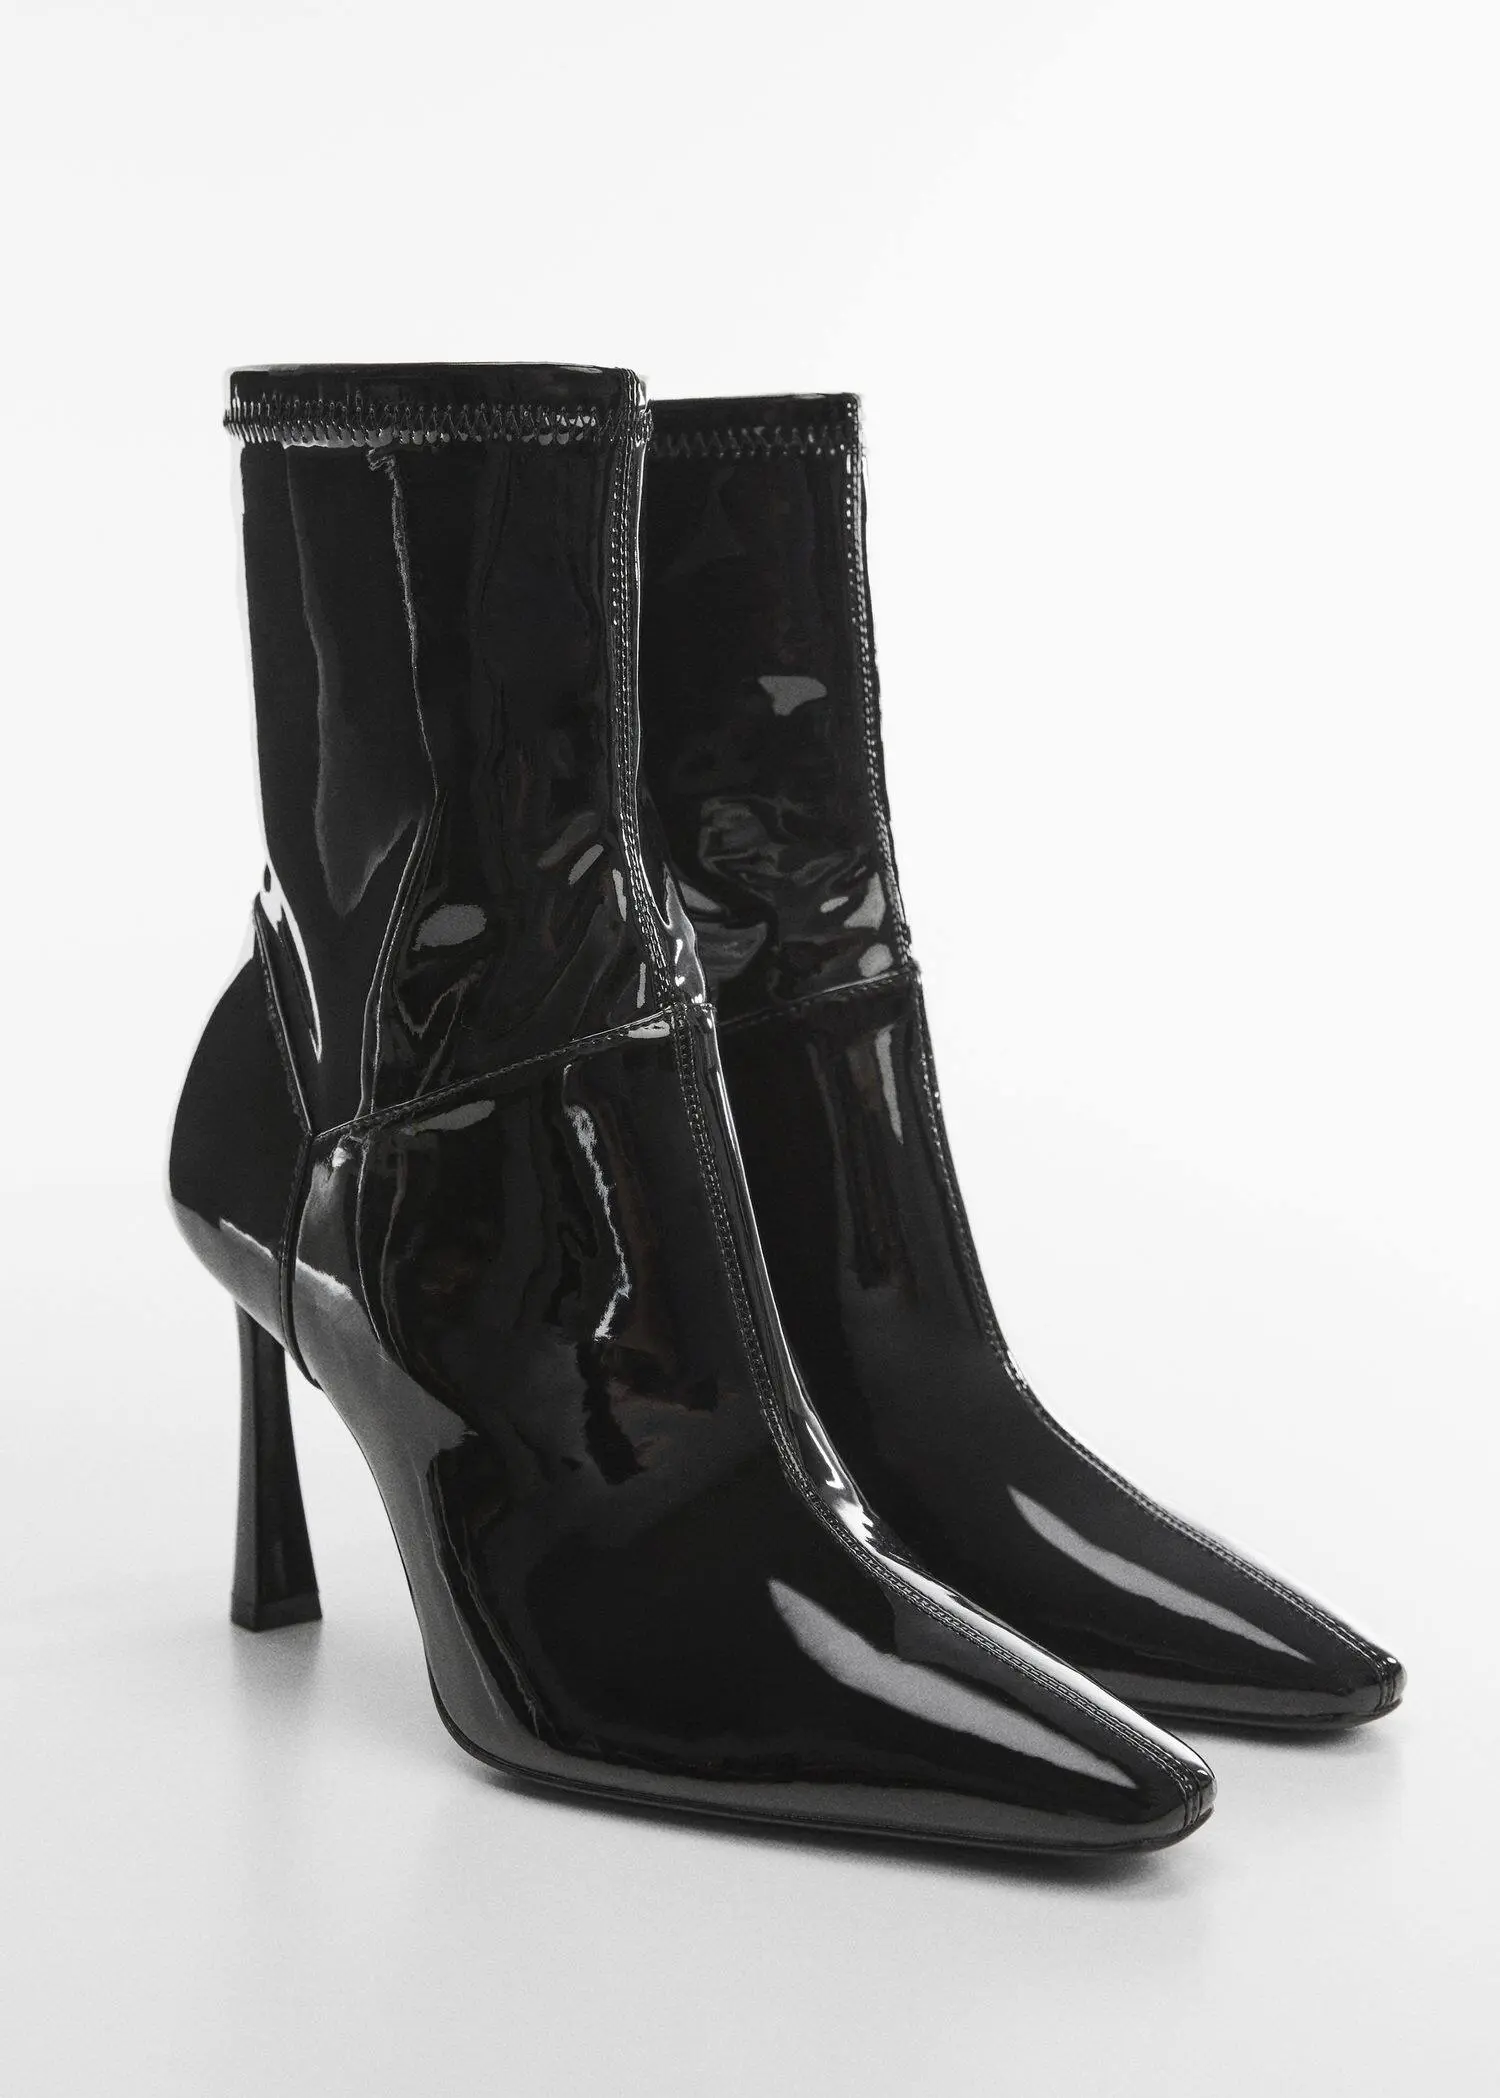 Mango Patent leather-effect heeled ankle boots. 3